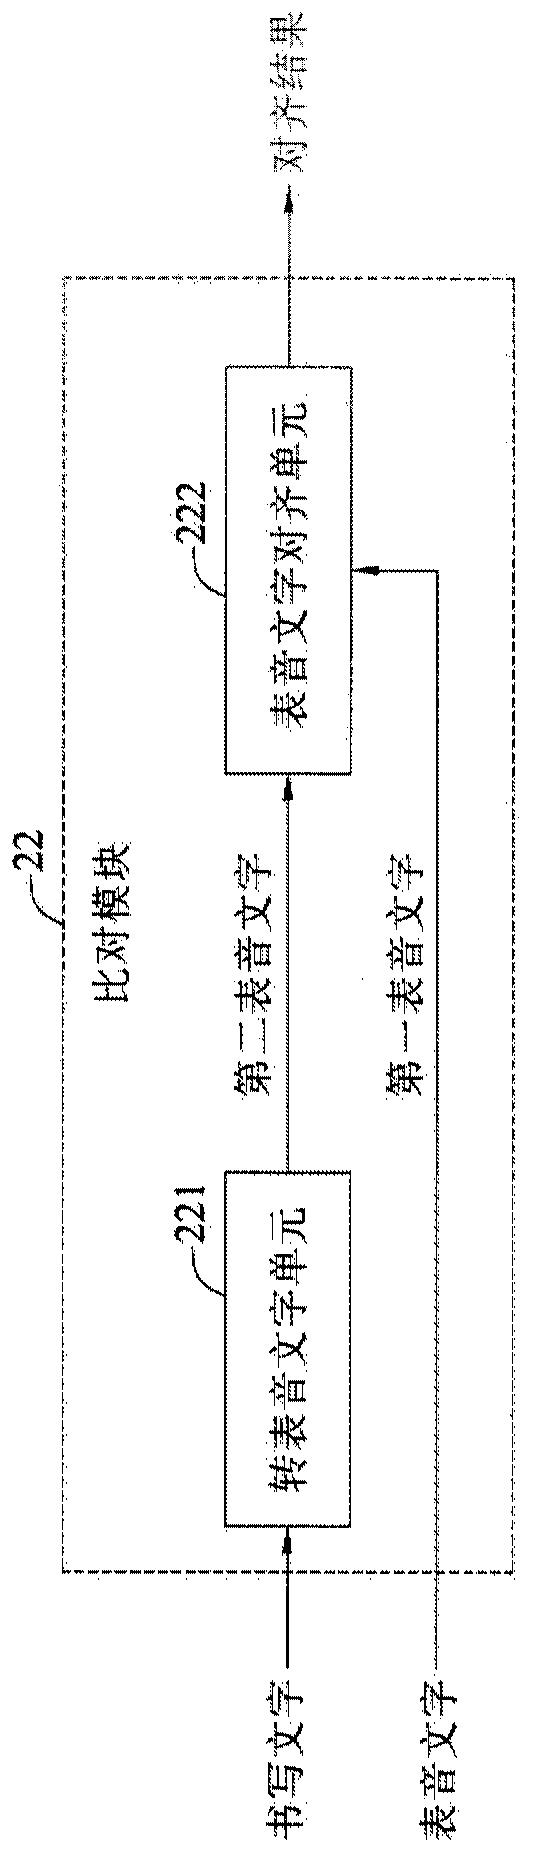 Speech recognition system, speech recognition method and computer program product